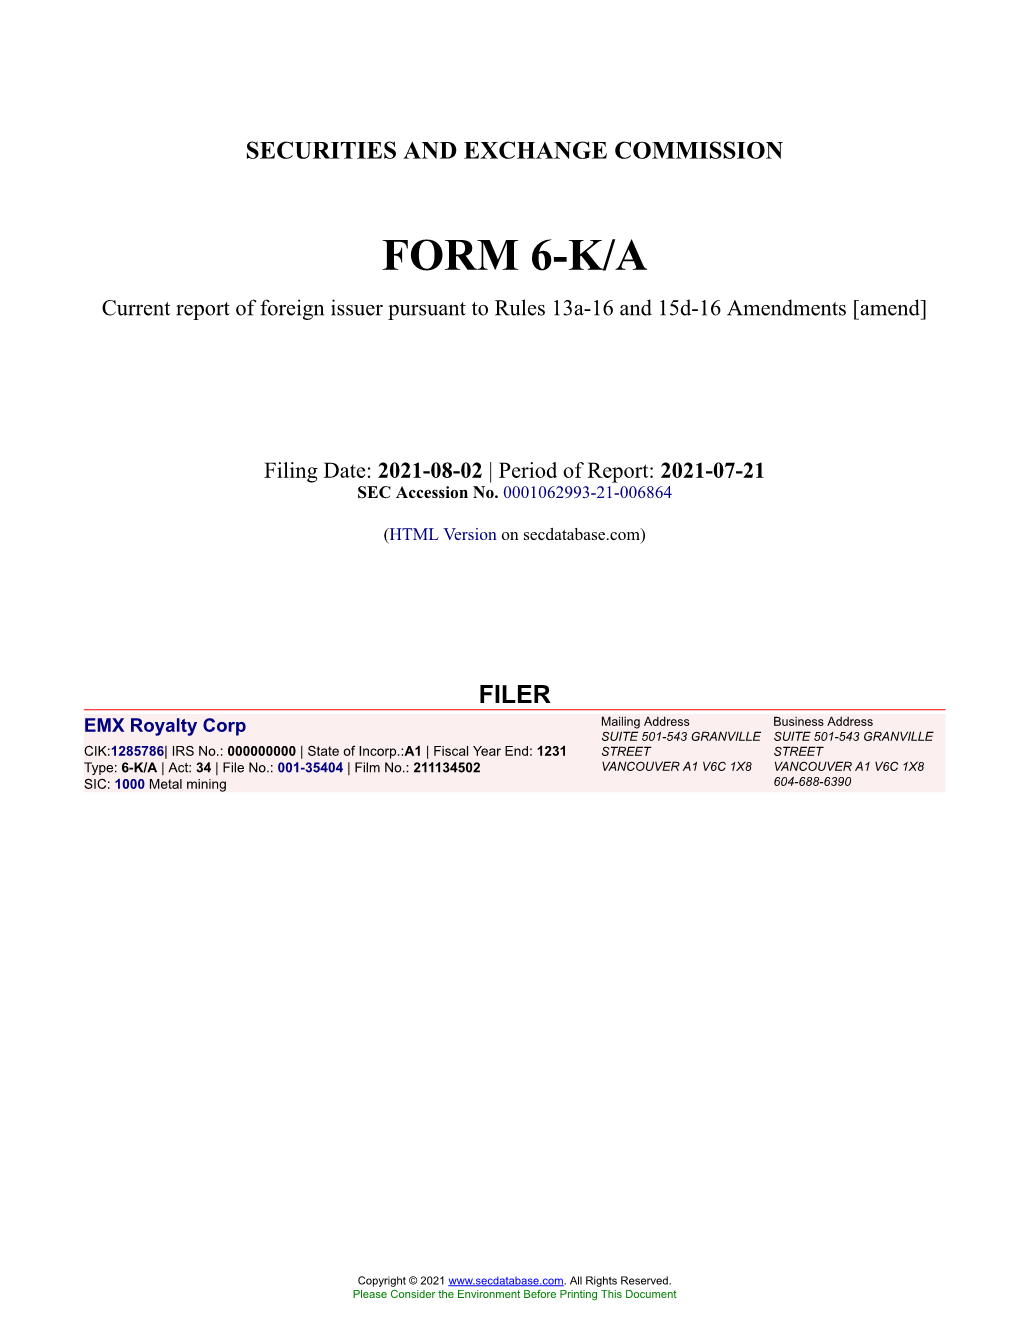 EMX Royalty Corp Form 6-K/A Current Event Report Filed 2021-08-02